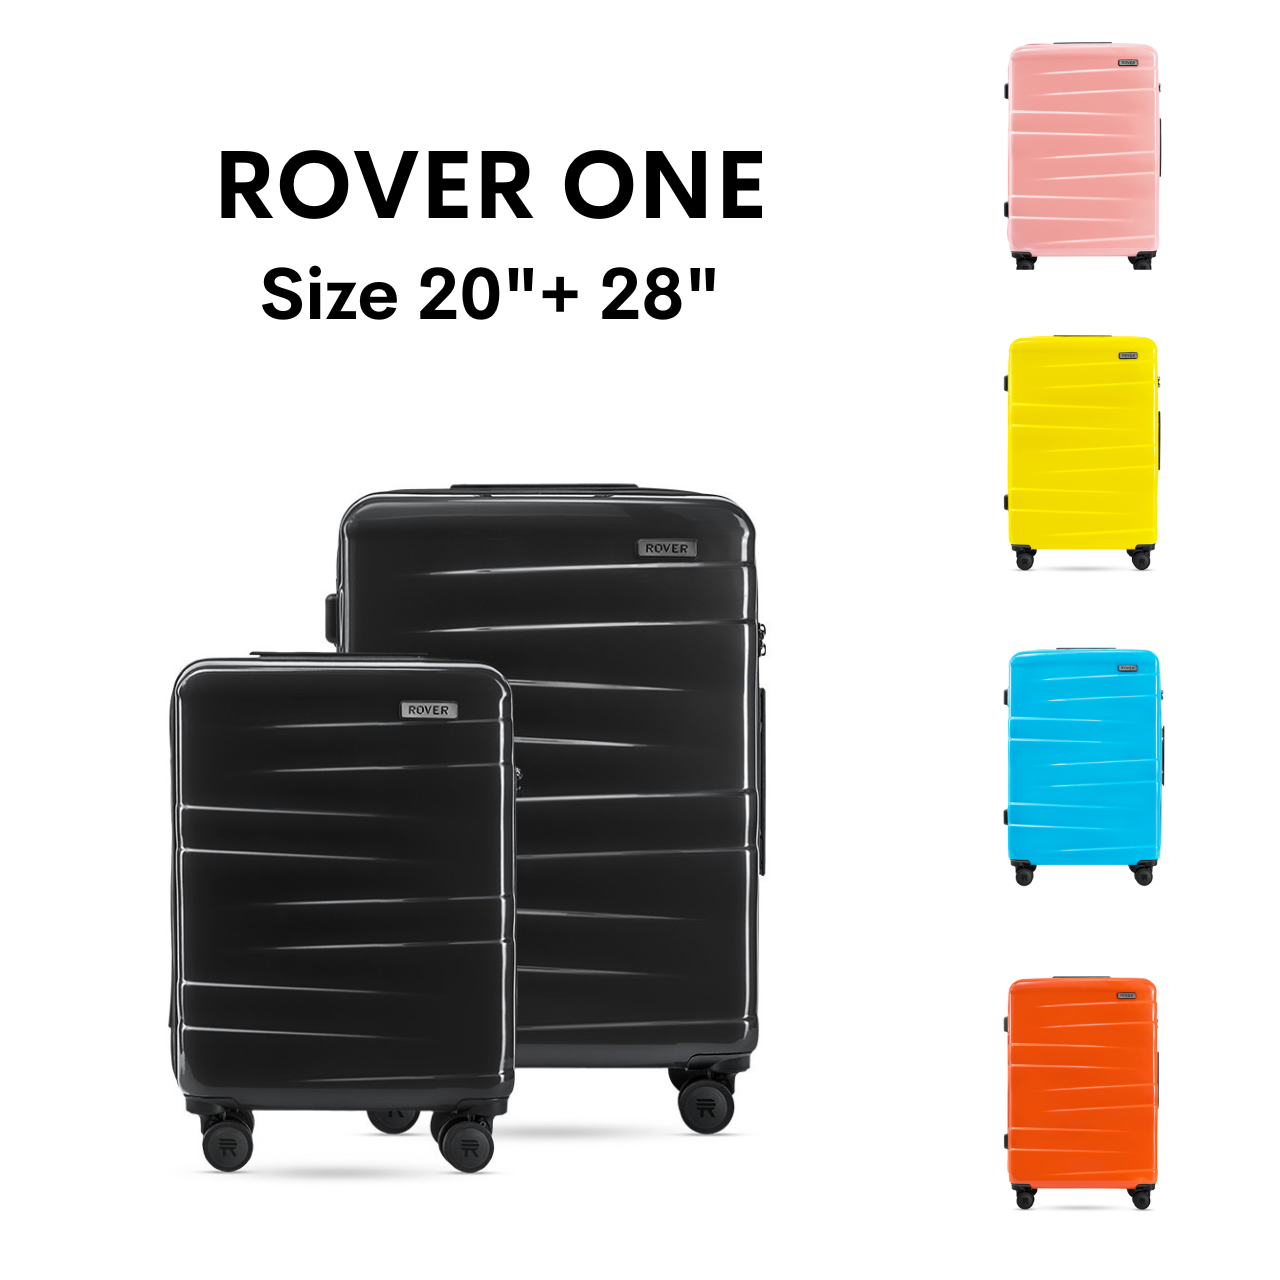 Bộ 2 Vali Rover One - Size 20 & Size 28